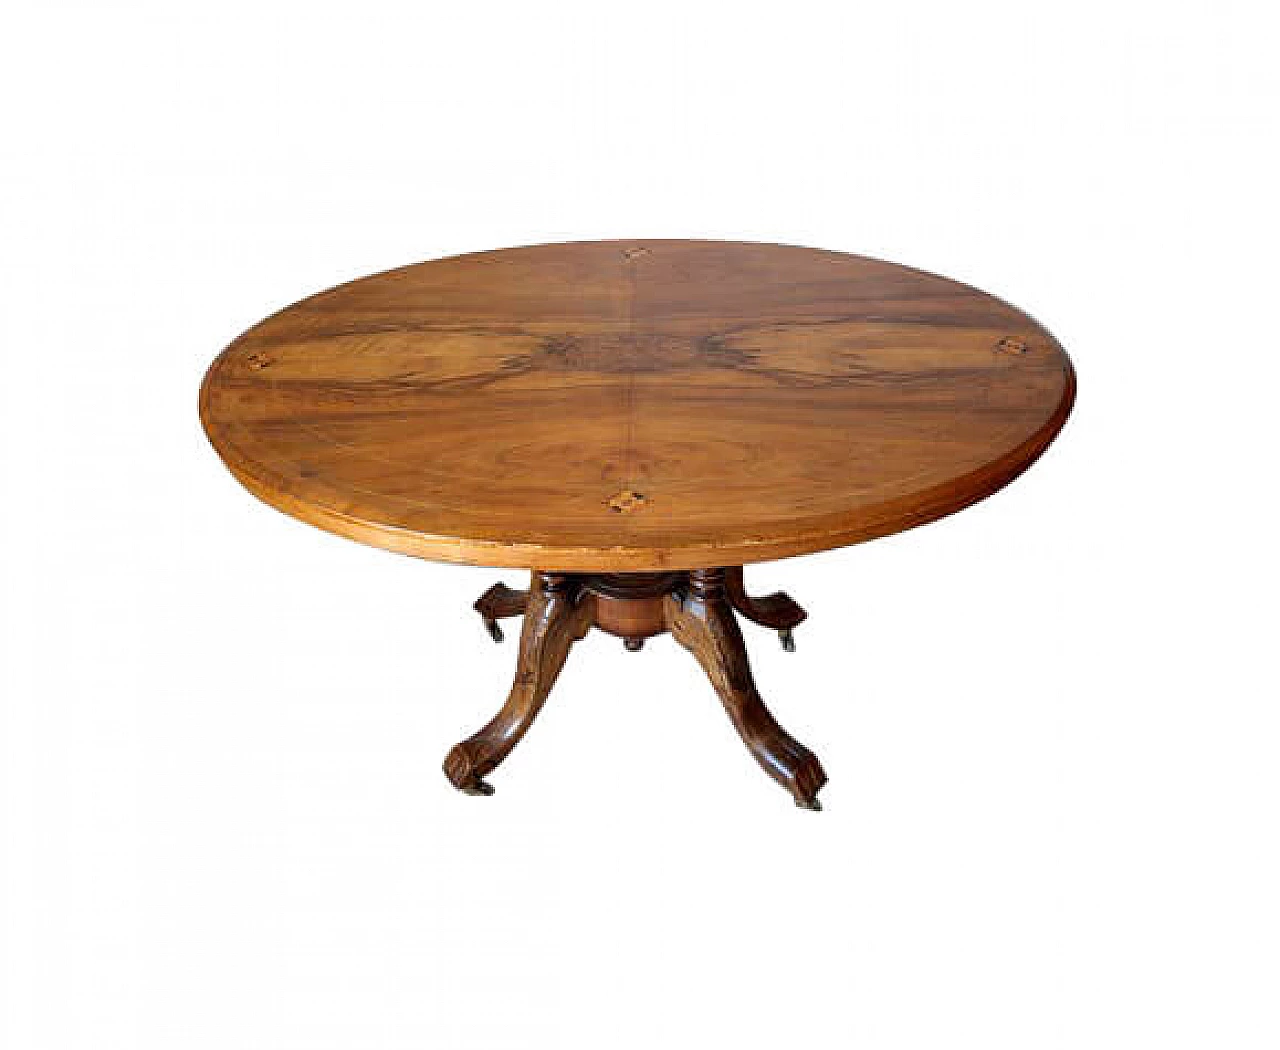 Oval table in walnut and oak with movable top, 19th century 1143377